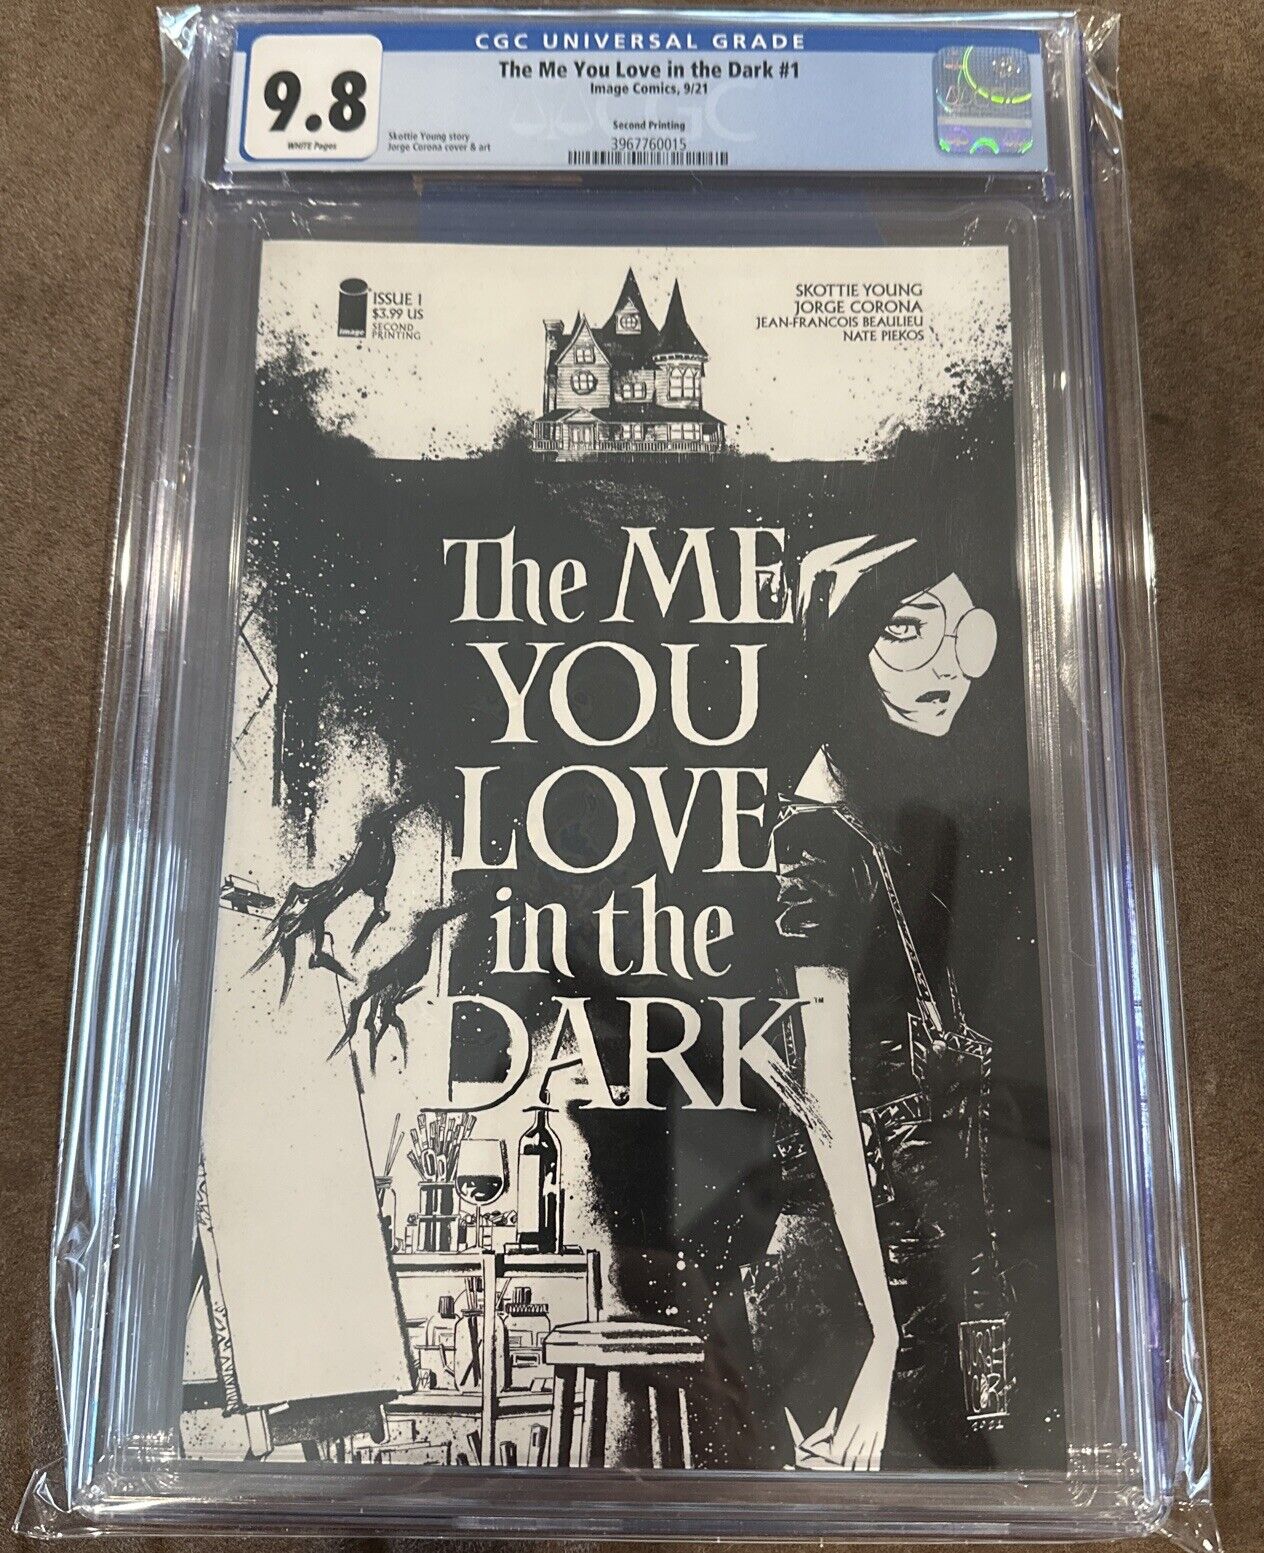 The Me You Love in the Dark 1-Jorge Corona Cover Variant 2ND PRINTING in CGC 9.8